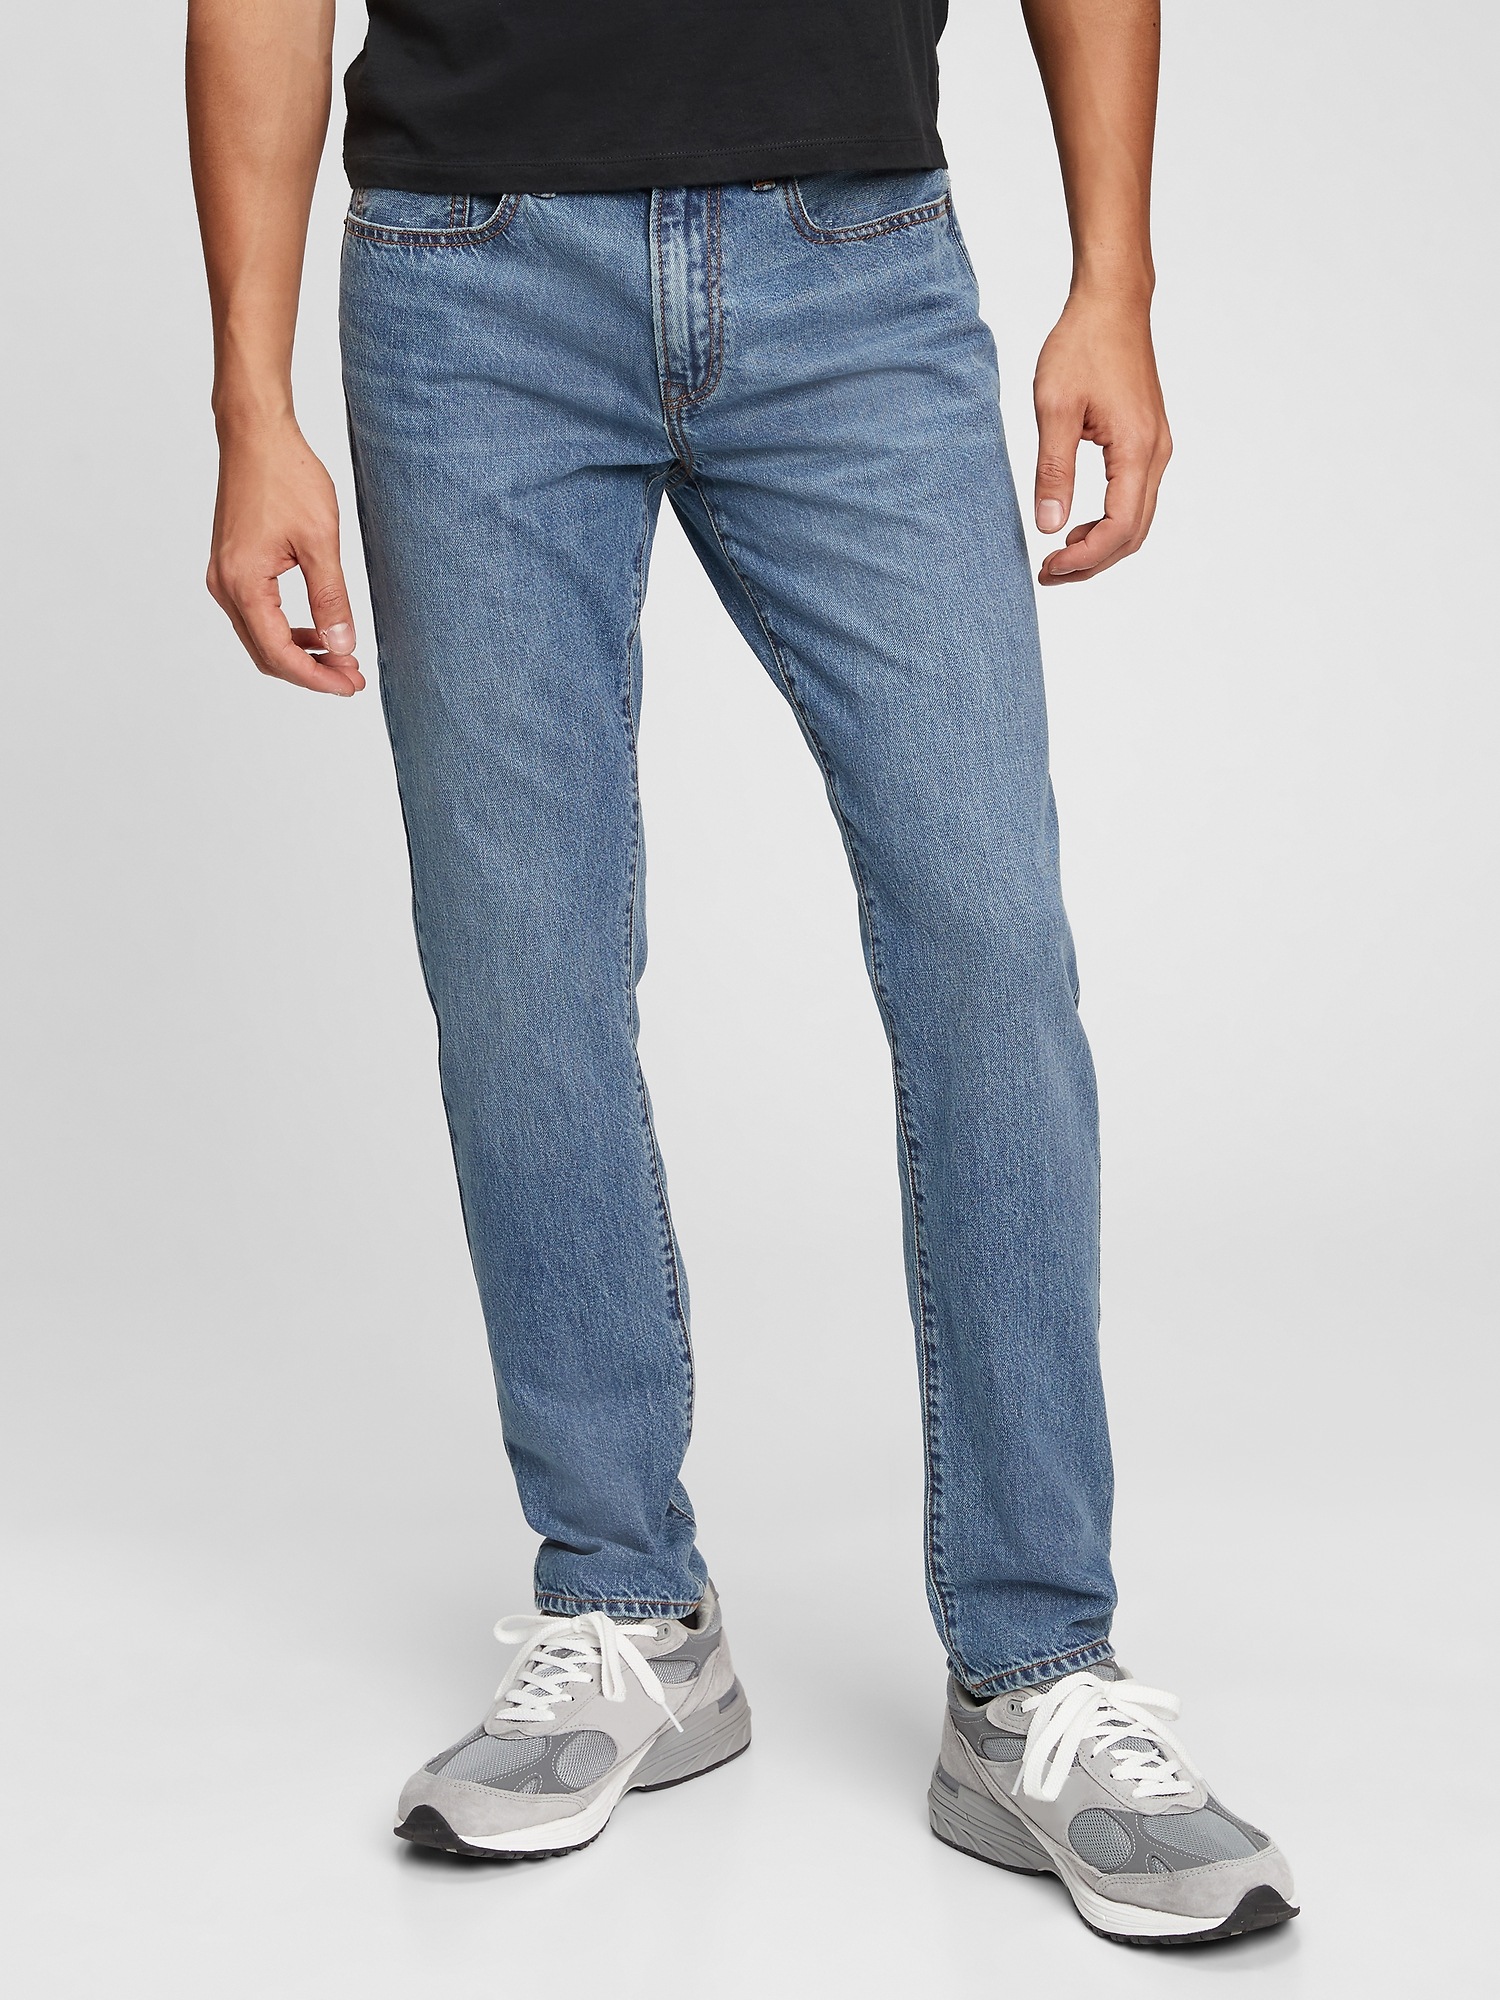 Mid Rise Slim Jeans with Washwell™ | Gap Factory